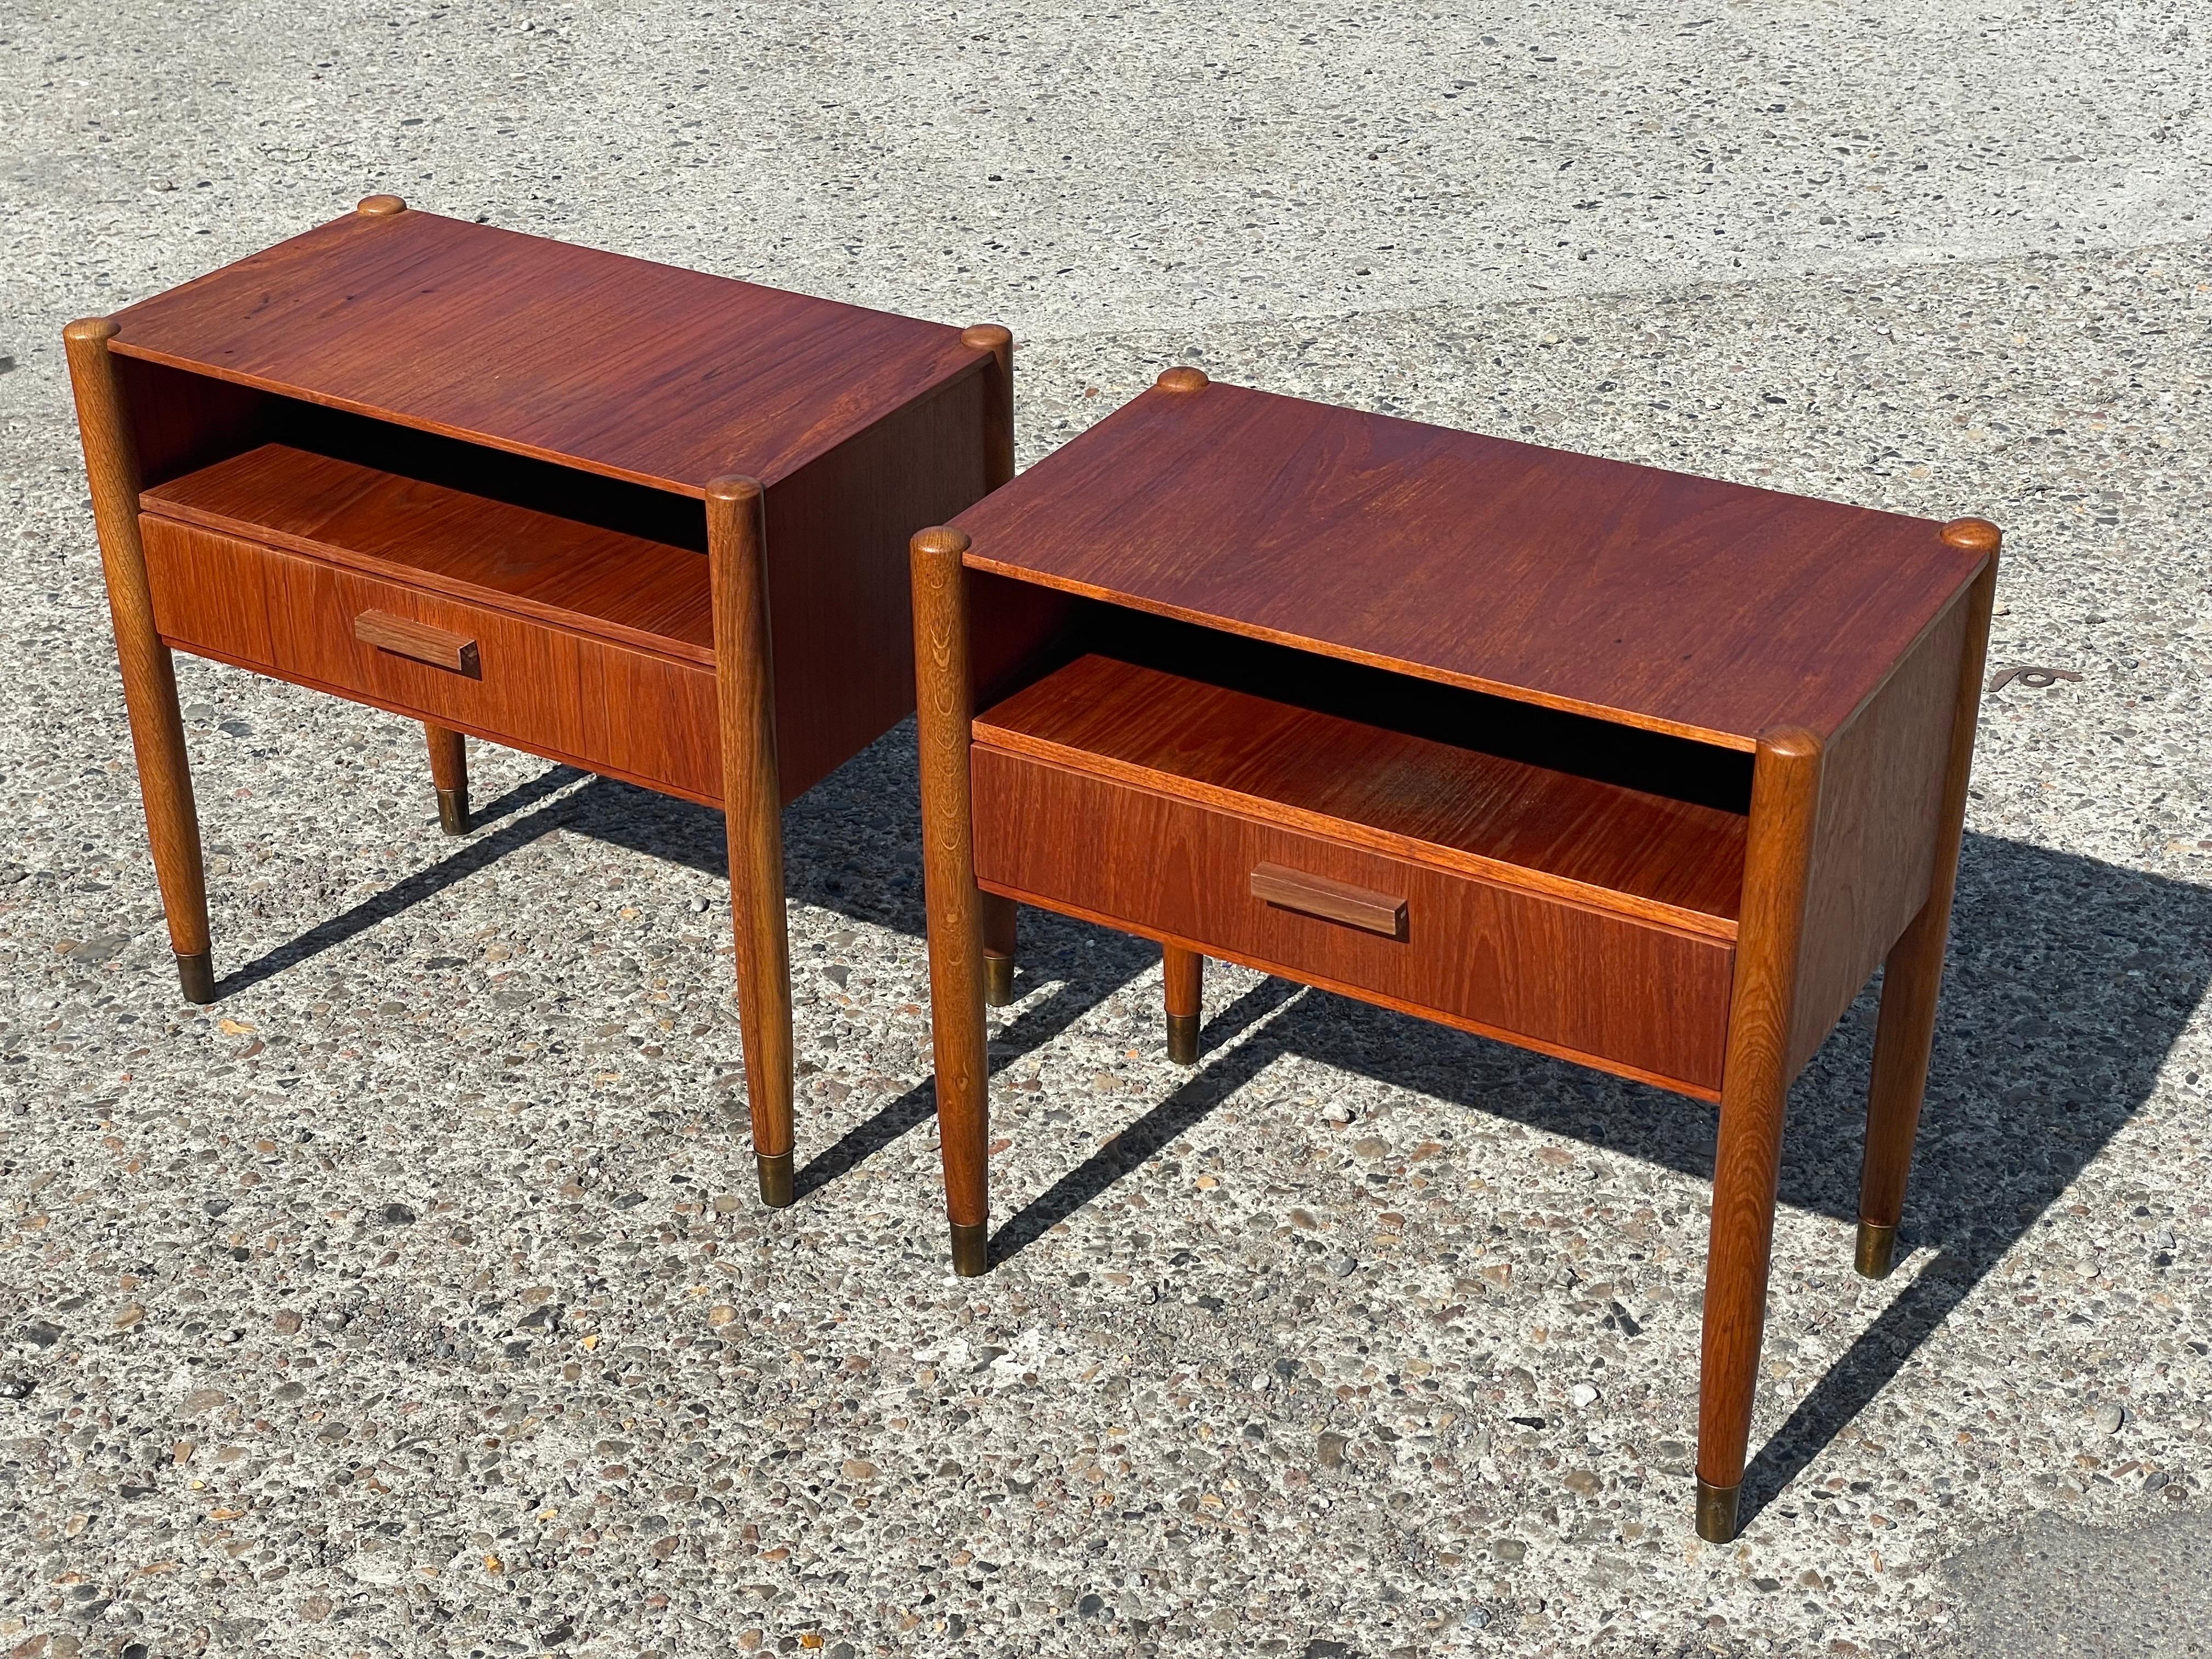 A pair of unique nightstands made from teak and oak. Tradional danish mid century modern craftmanship from the 1960´s. Simple but stunning details exposing the minimalism and functionality of this glorious era of Danish design.